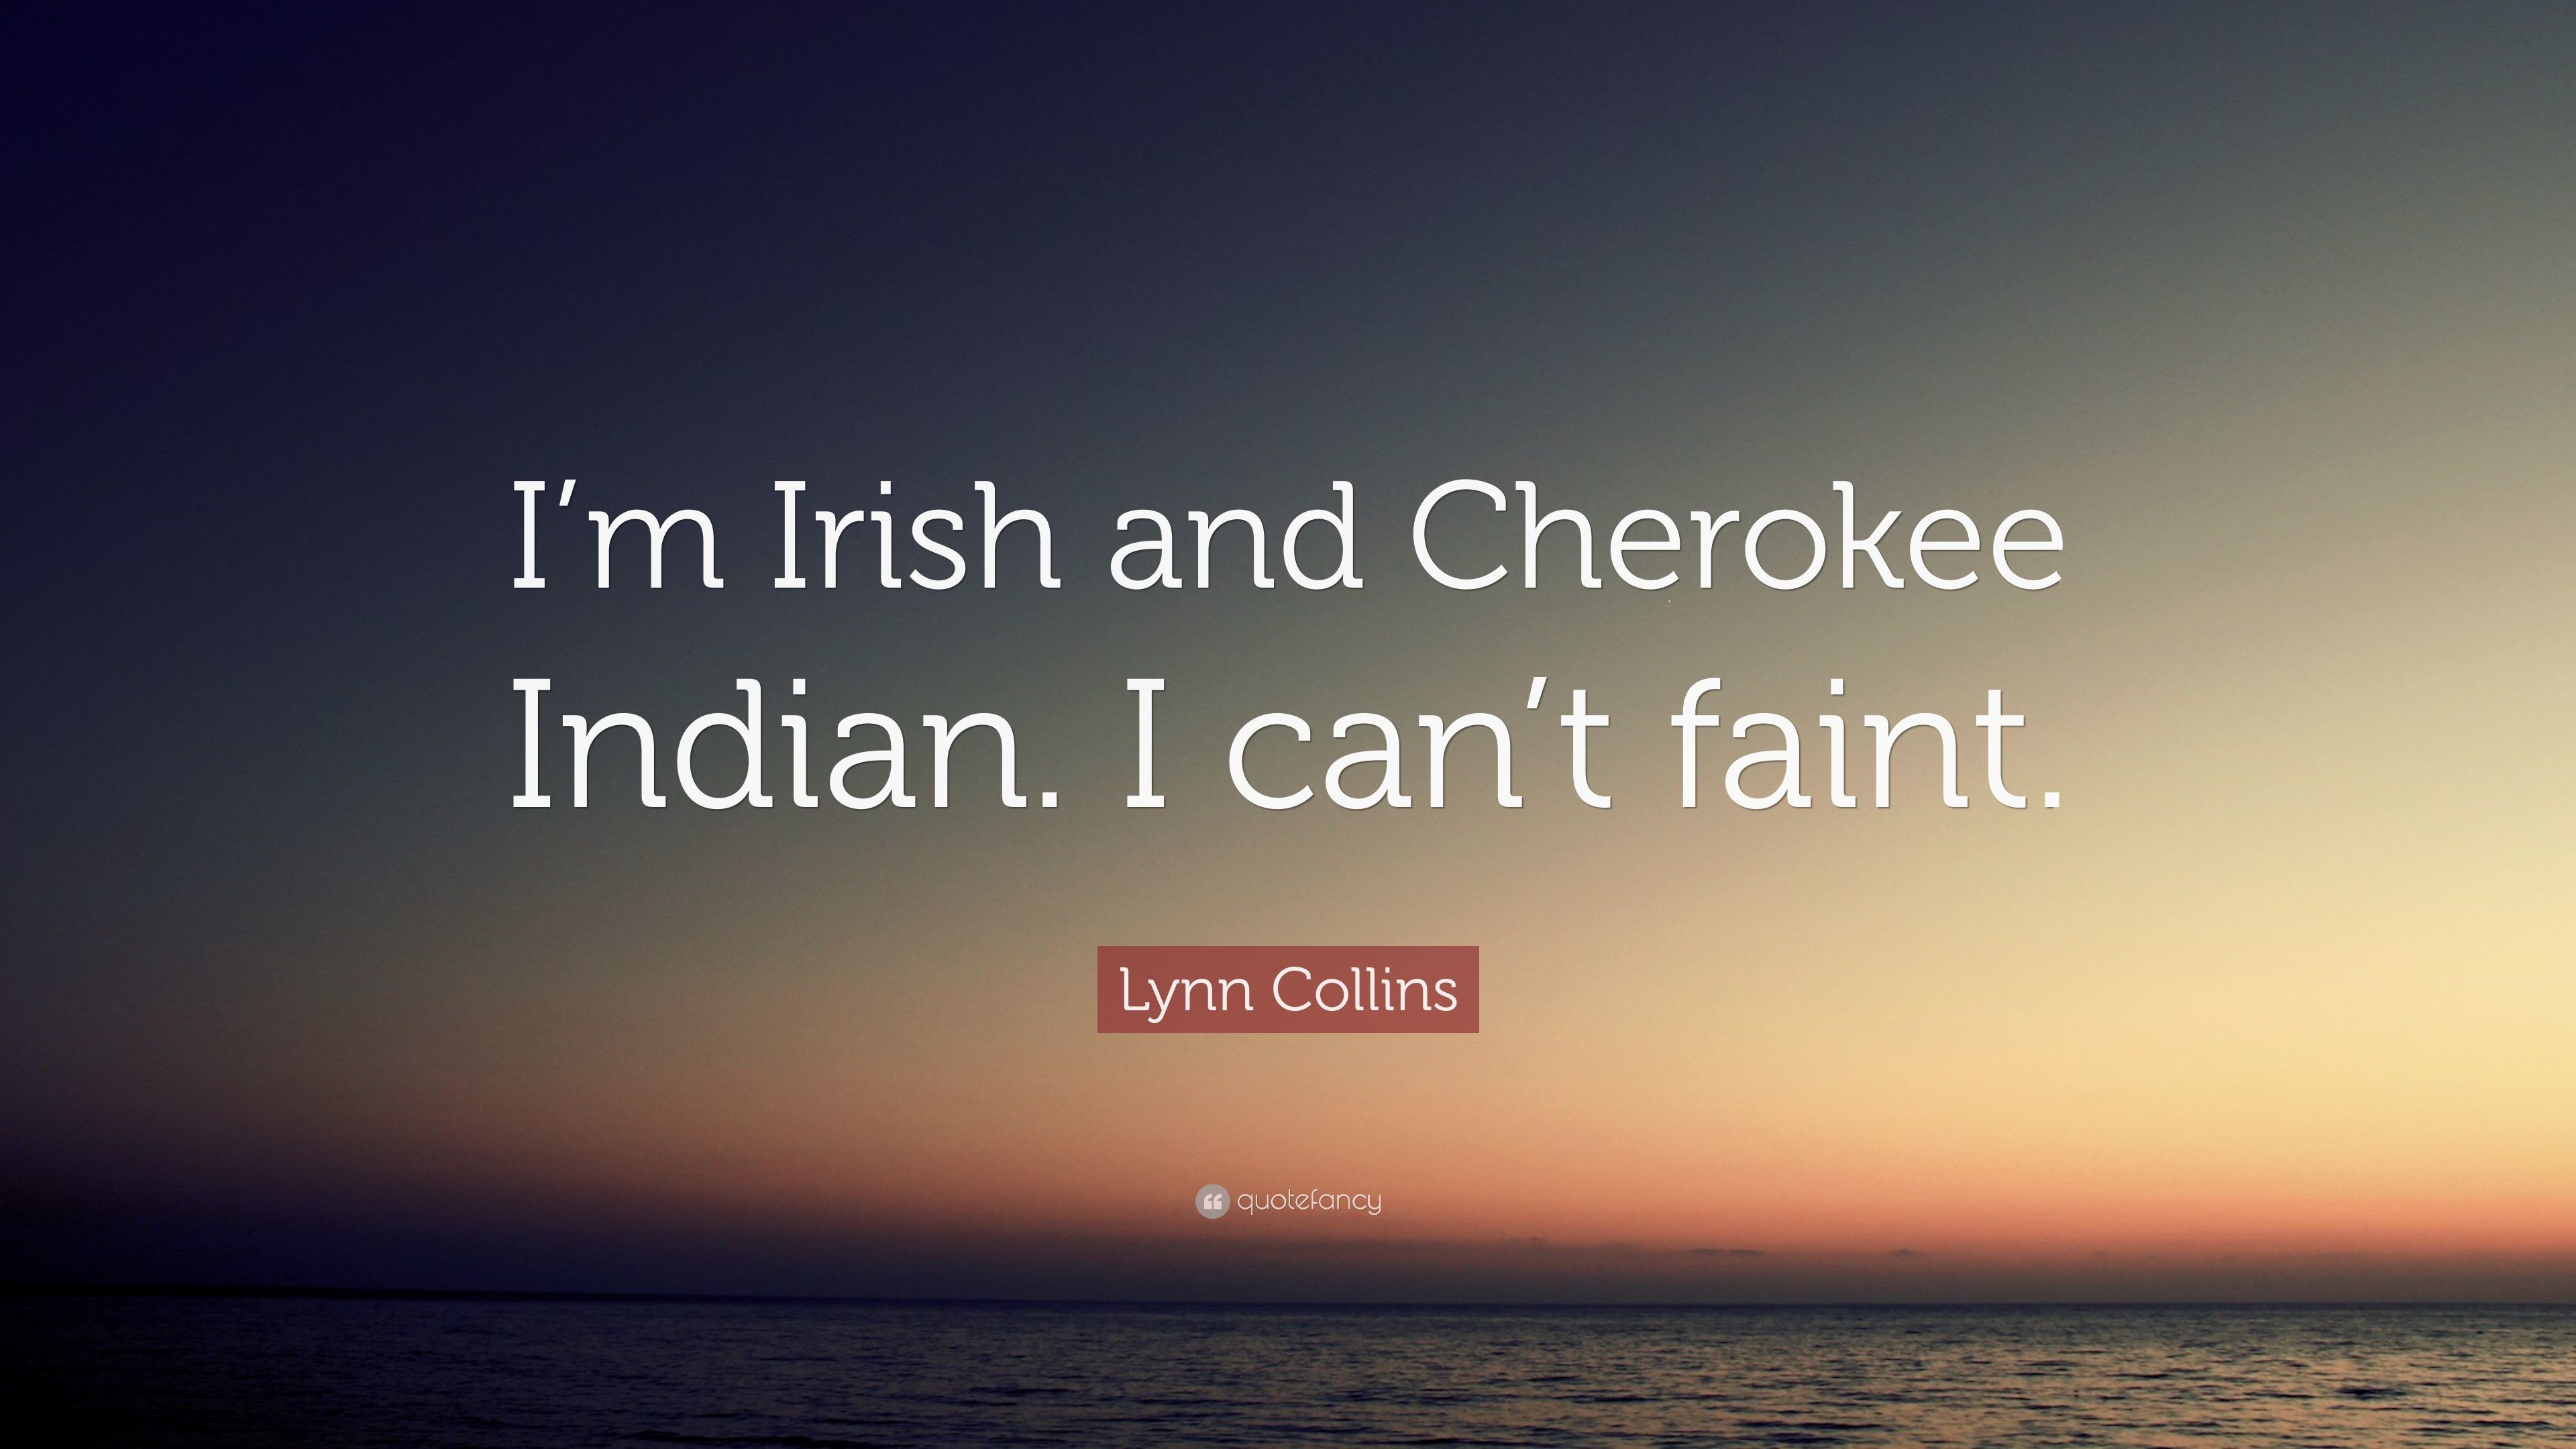 Lynn Collins Quote Im Irish and Cherokee Indian. I can